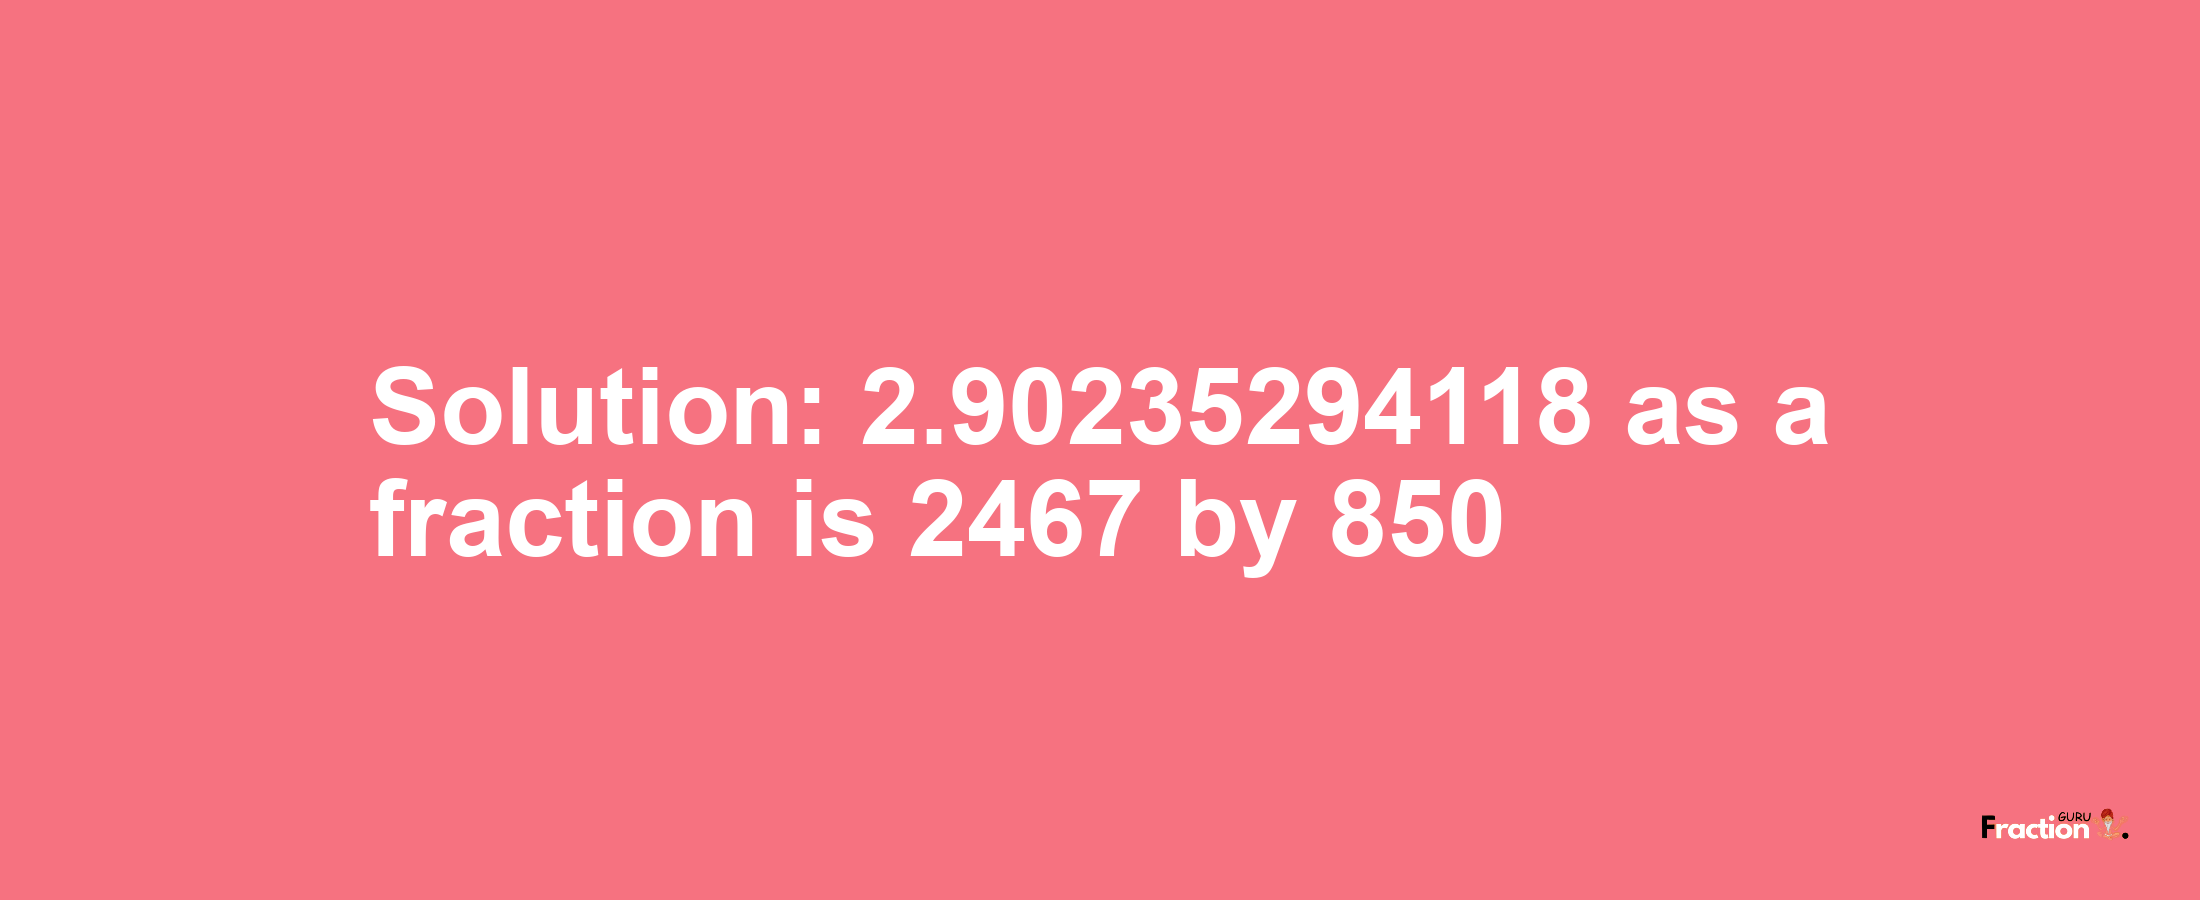 Solution:2.90235294118 as a fraction is 2467/850